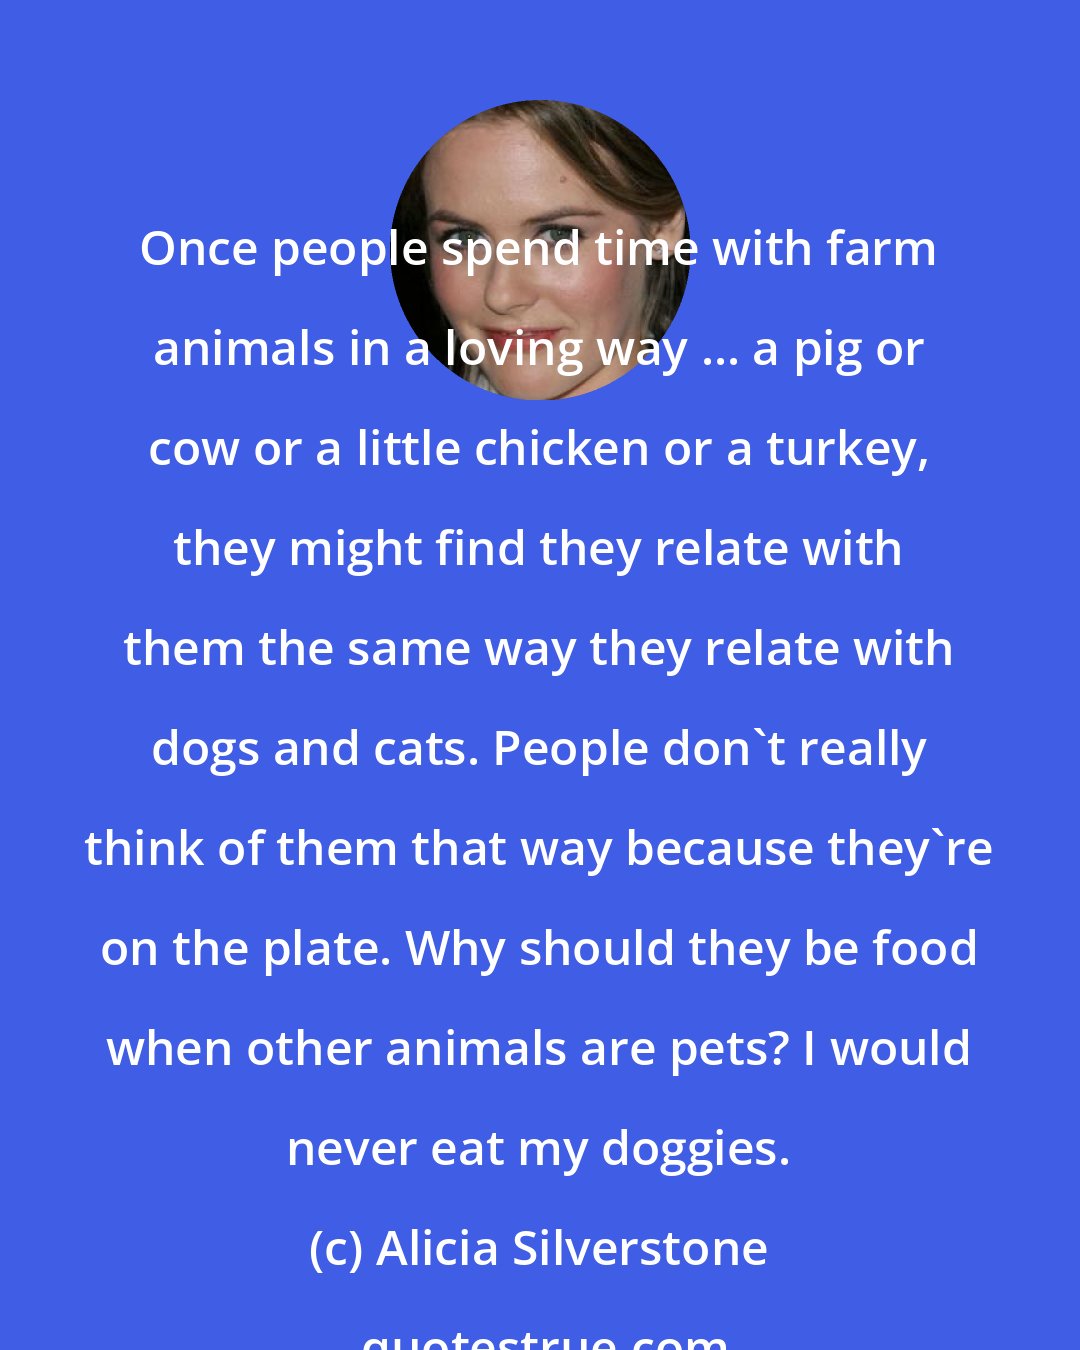 Alicia Silverstone: Once people spend time with farm animals in a loving way ... a pig or cow or a little chicken or a turkey, they might find they relate with them the same way they relate with dogs and cats. People don't really think of them that way because they're on the plate. Why should they be food when other animals are pets? I would never eat my doggies.